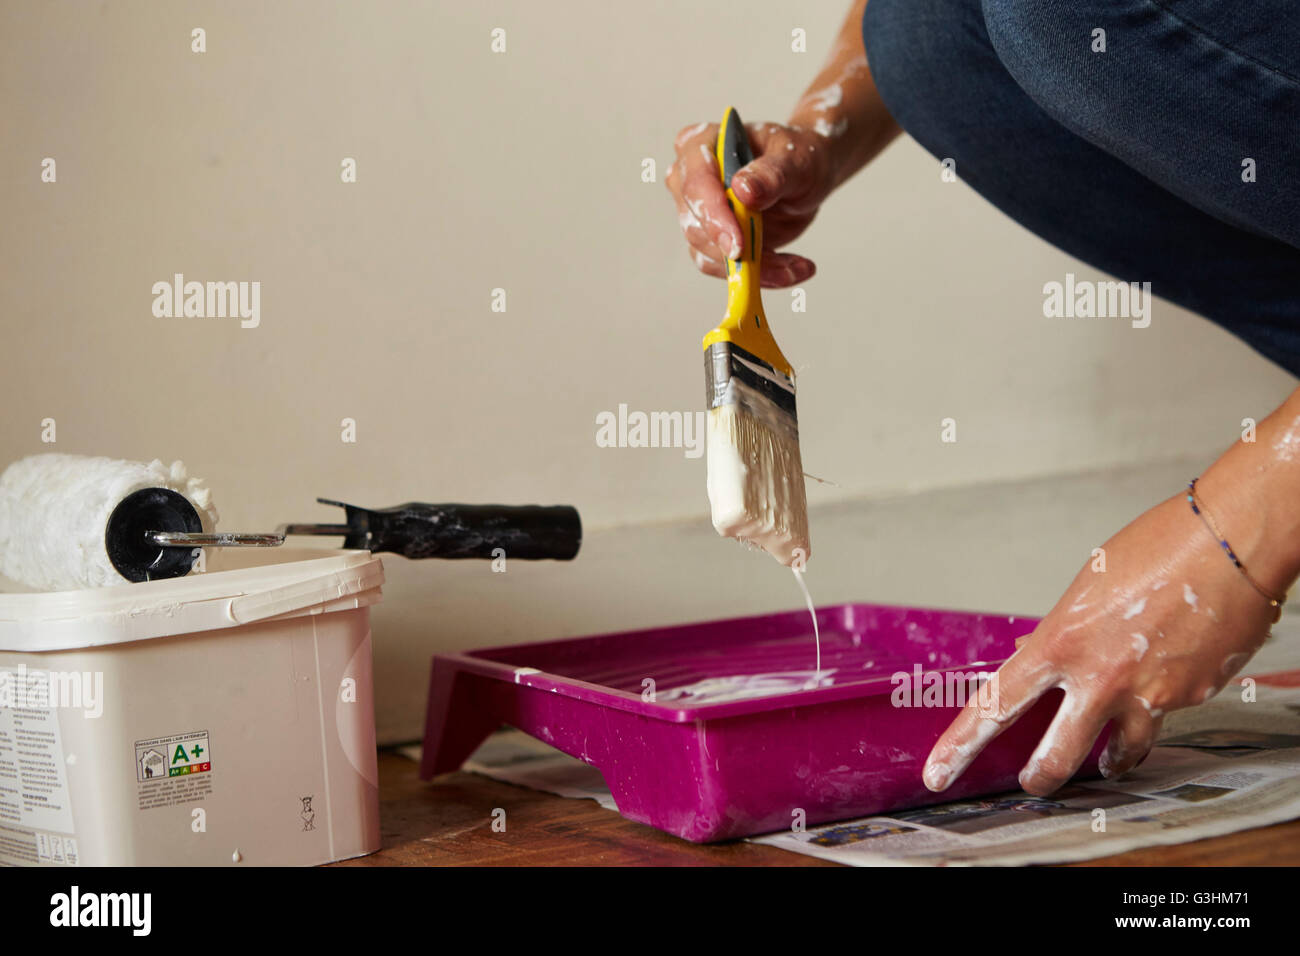 Woman dipping paintbrush into paint tray, close-up, mid section Stock Photo